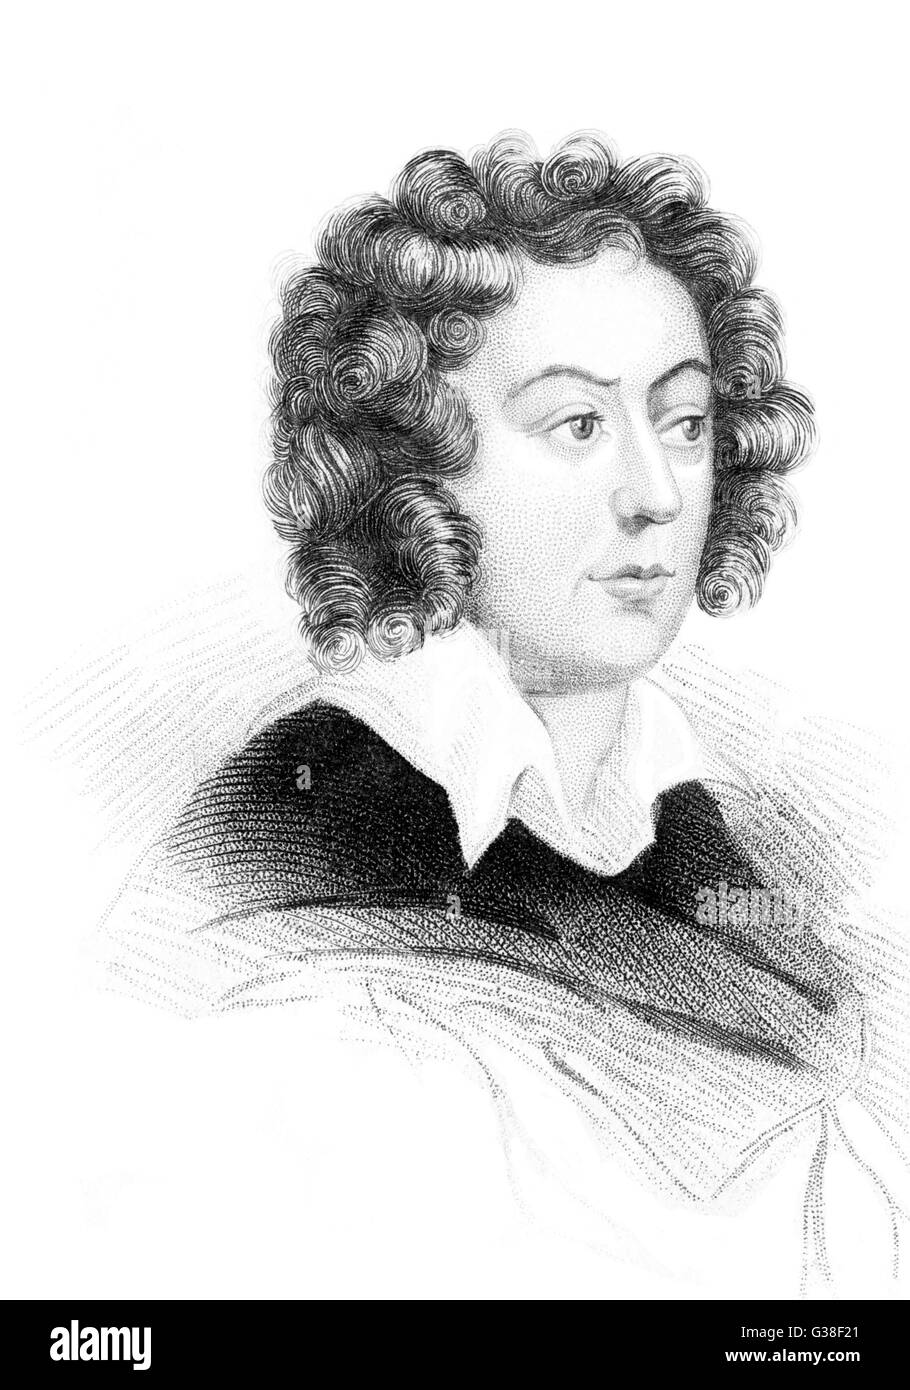 HENRY PURCELL Stock Photo